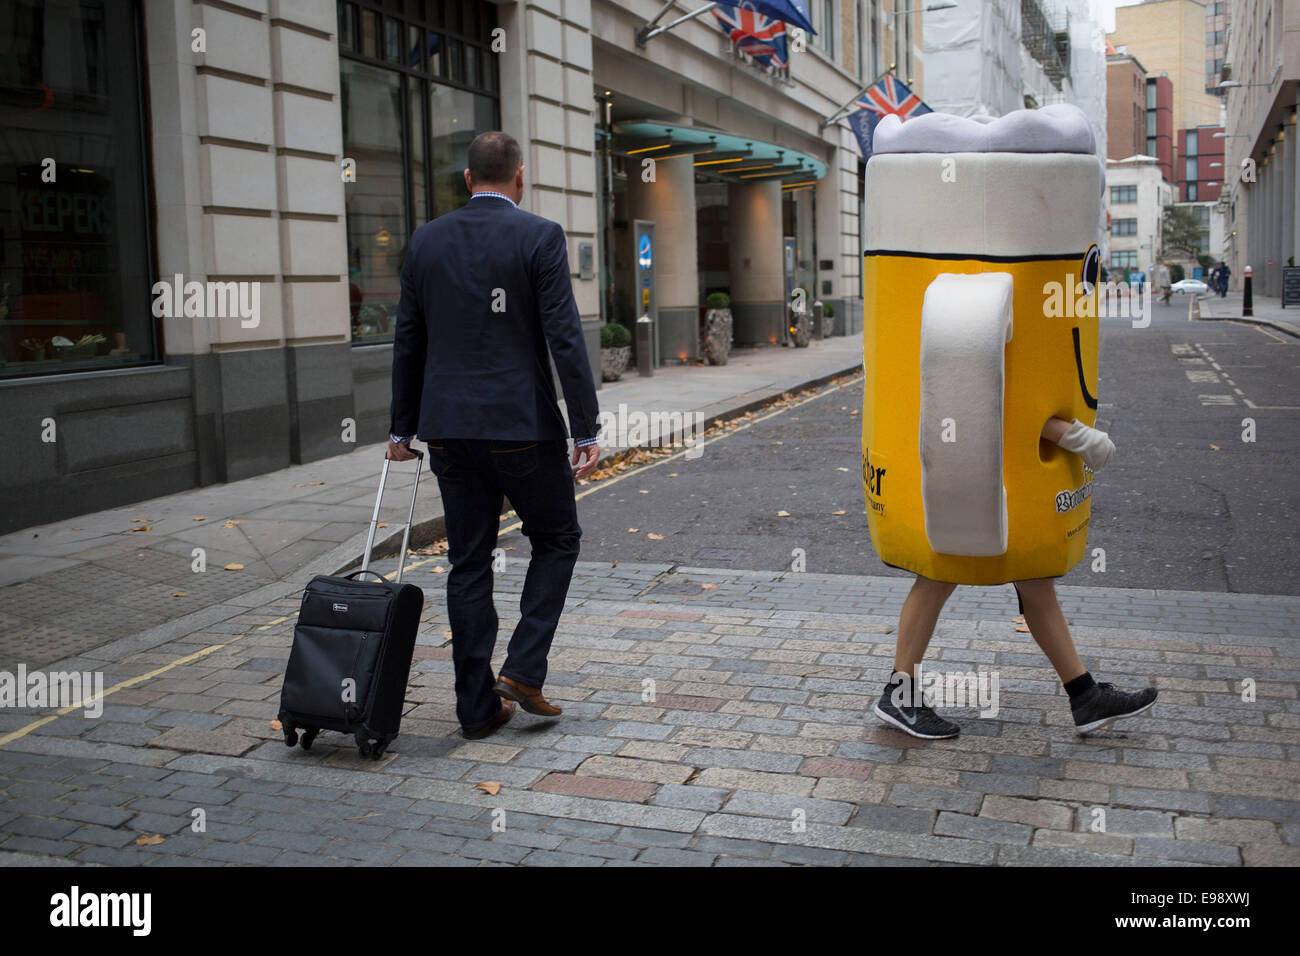 Dressed up as a glass of beer in the City of London, UK. Weird street scene as a man in a suit passes this large scale glass. Stock Photo